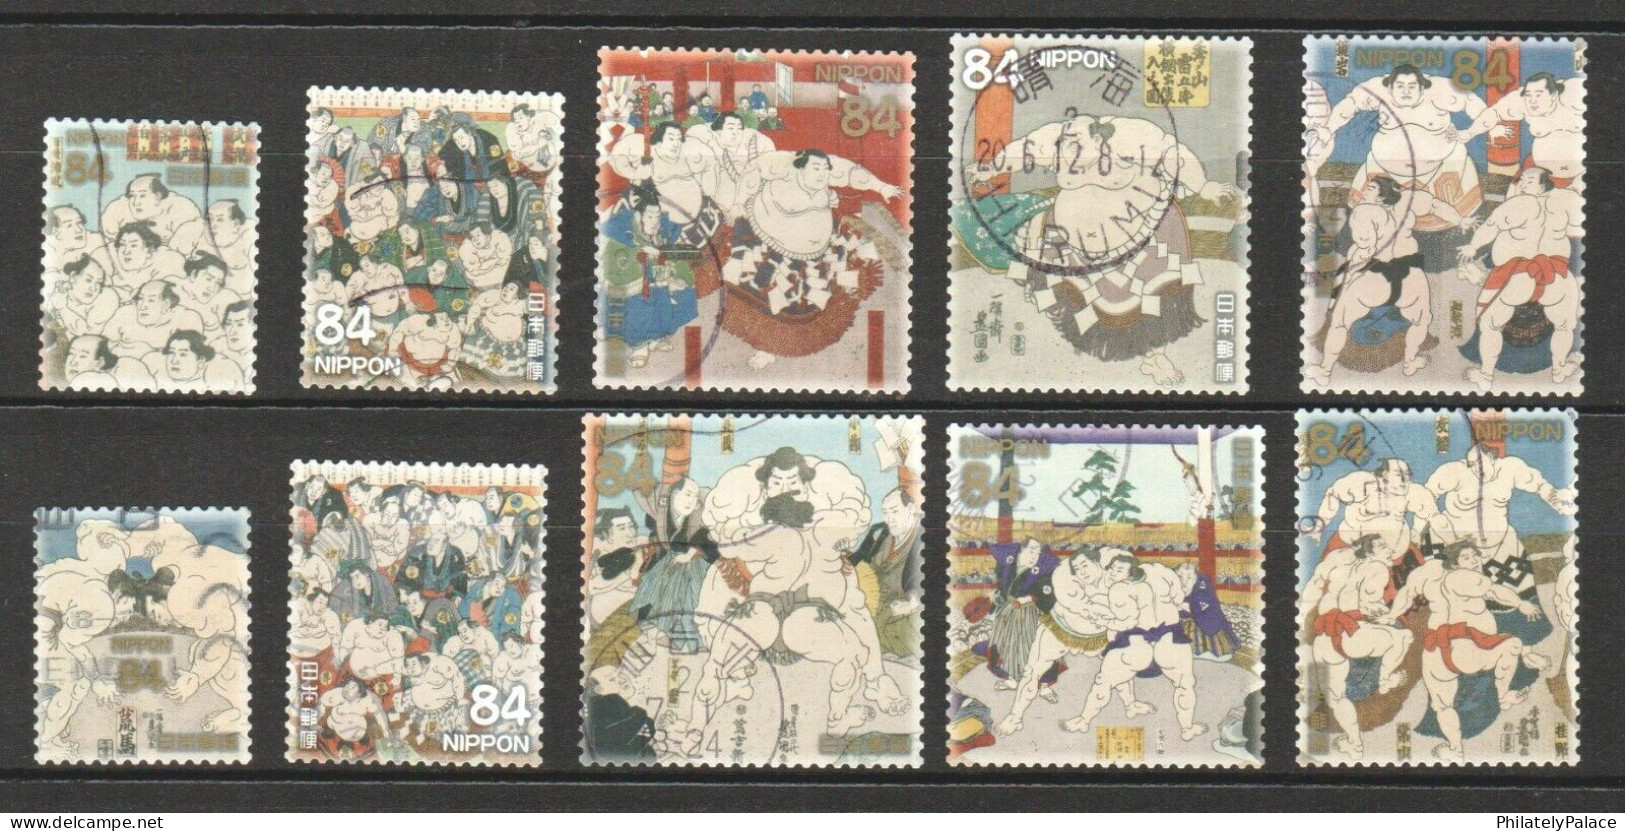 JAPAN 2020 TRADITIONAL CULTURE PART 3 SUMO 84 YEN,CULTURE TRADITIONAL ,SPORT, GAME, 10V SET USED - Gebraucht